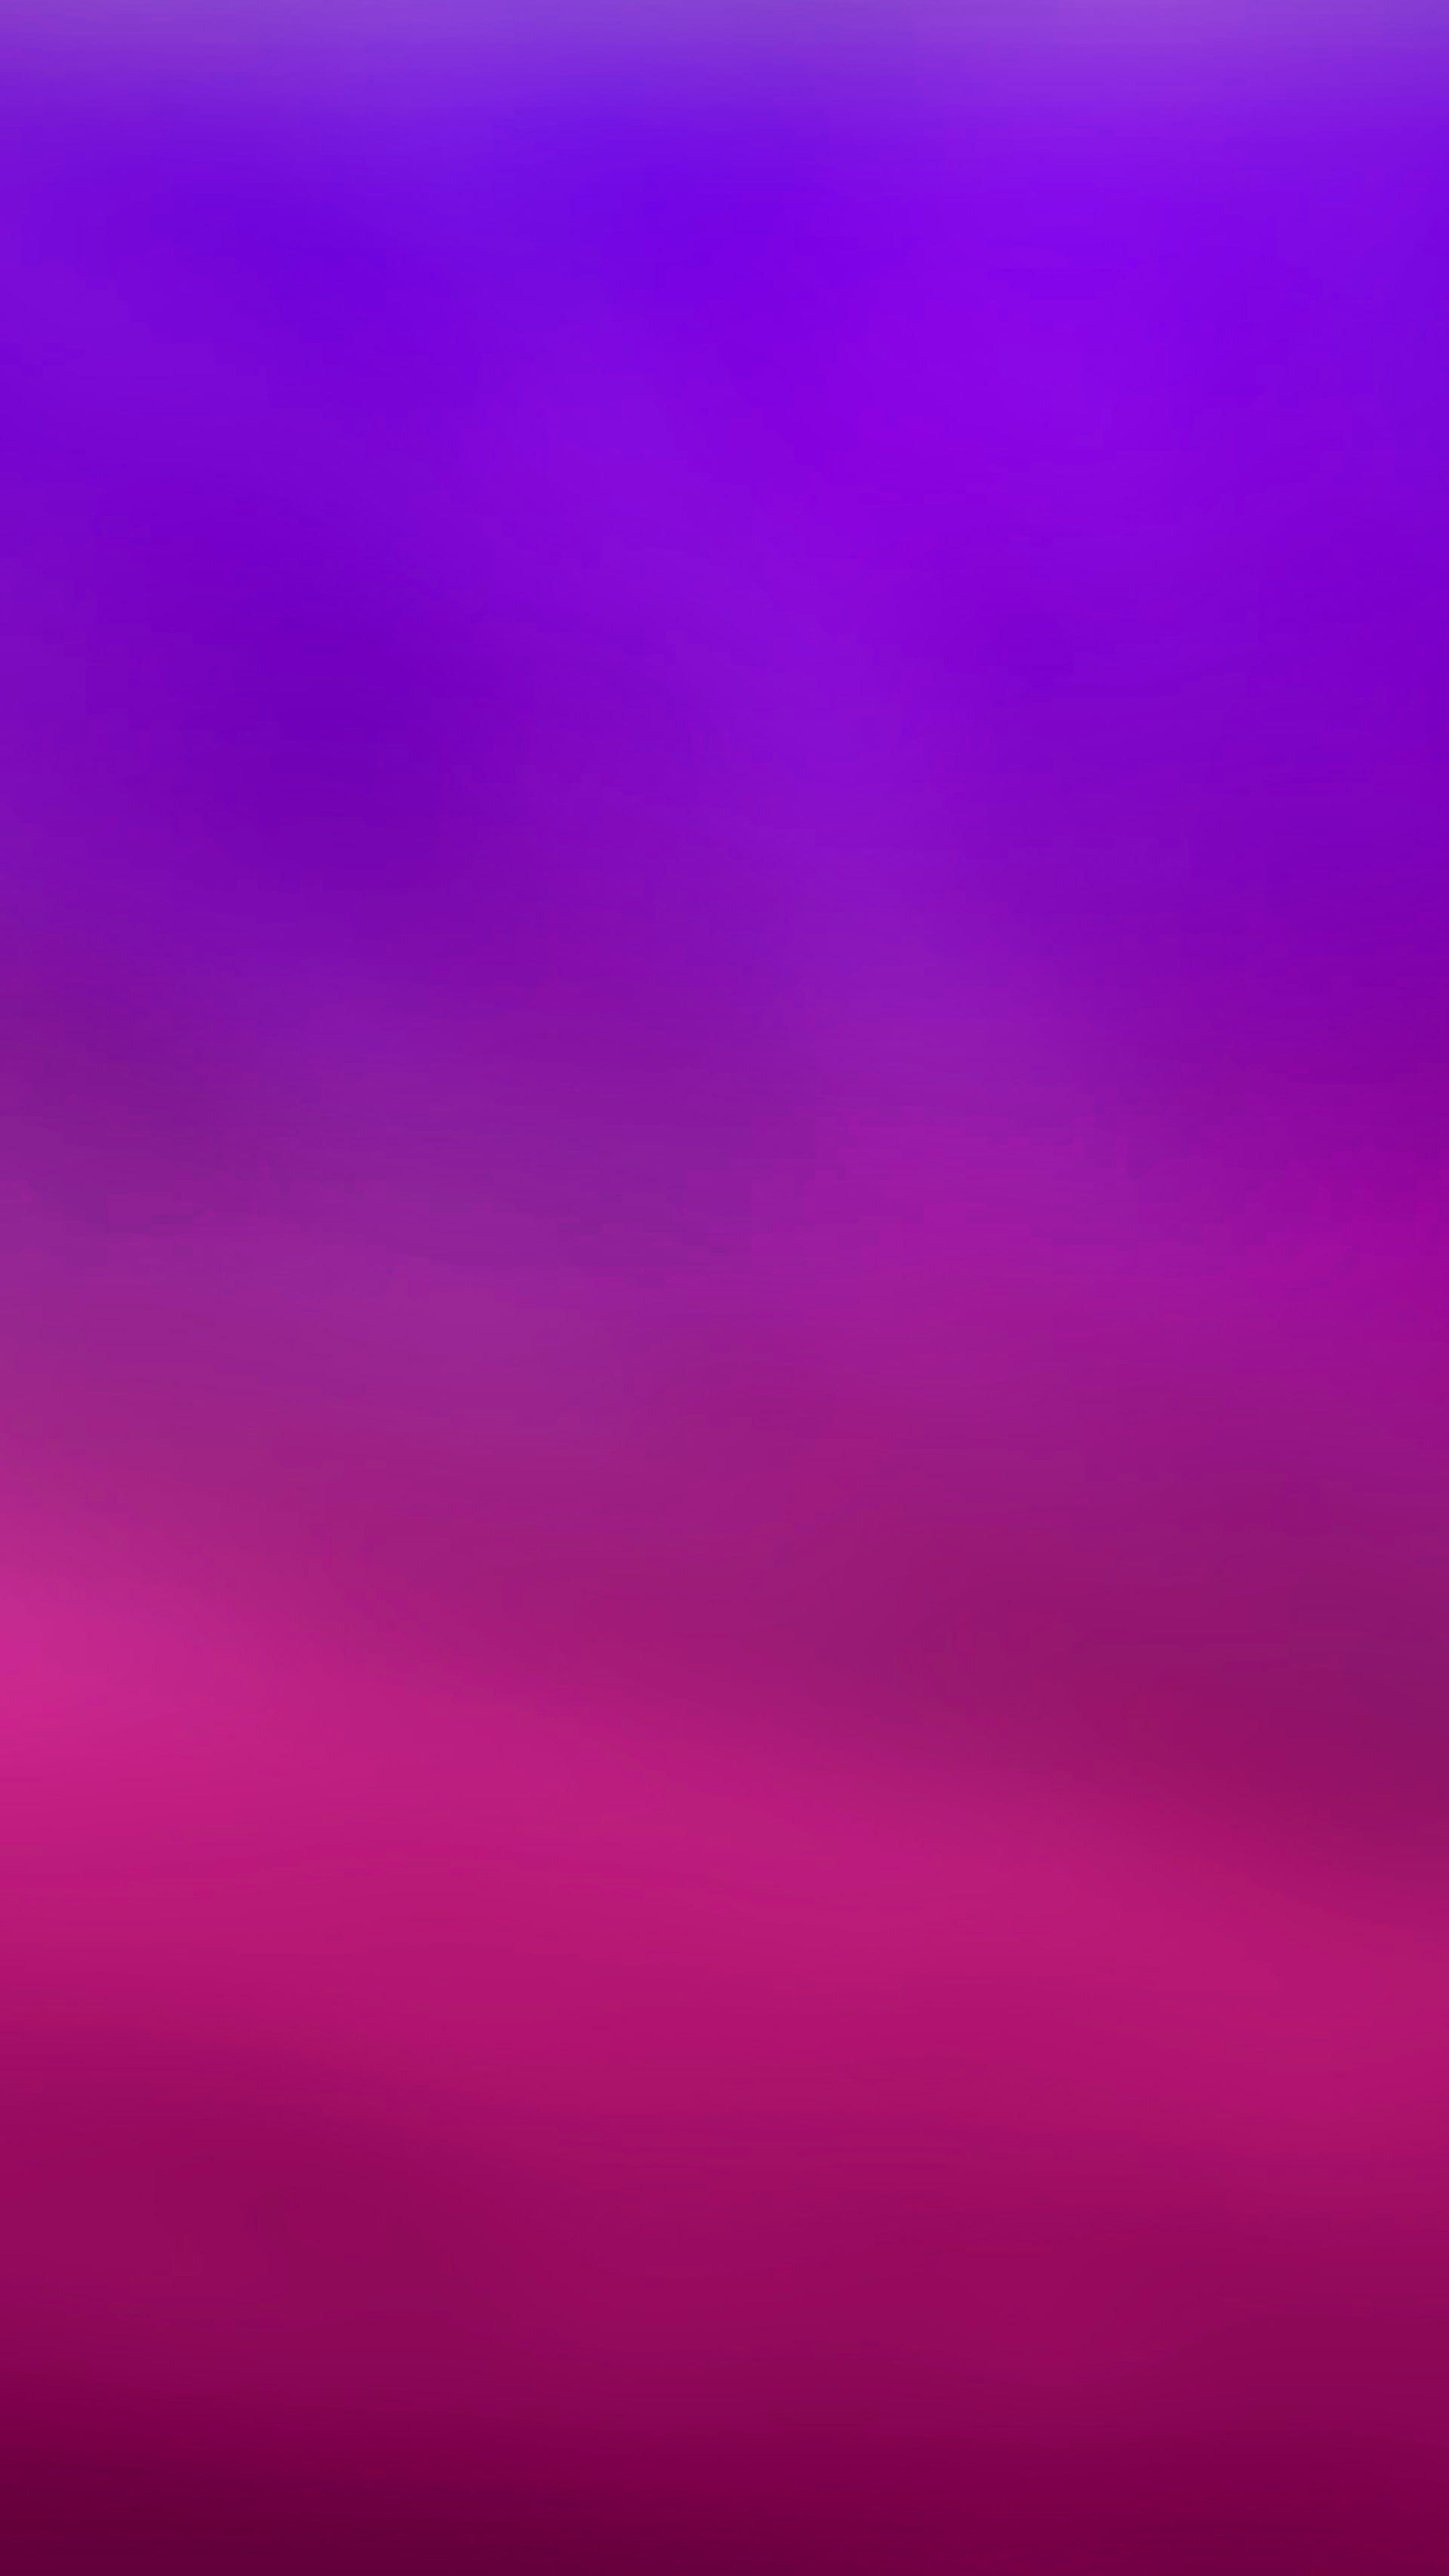 simple background, pink color, backgrounds, full frame, purple